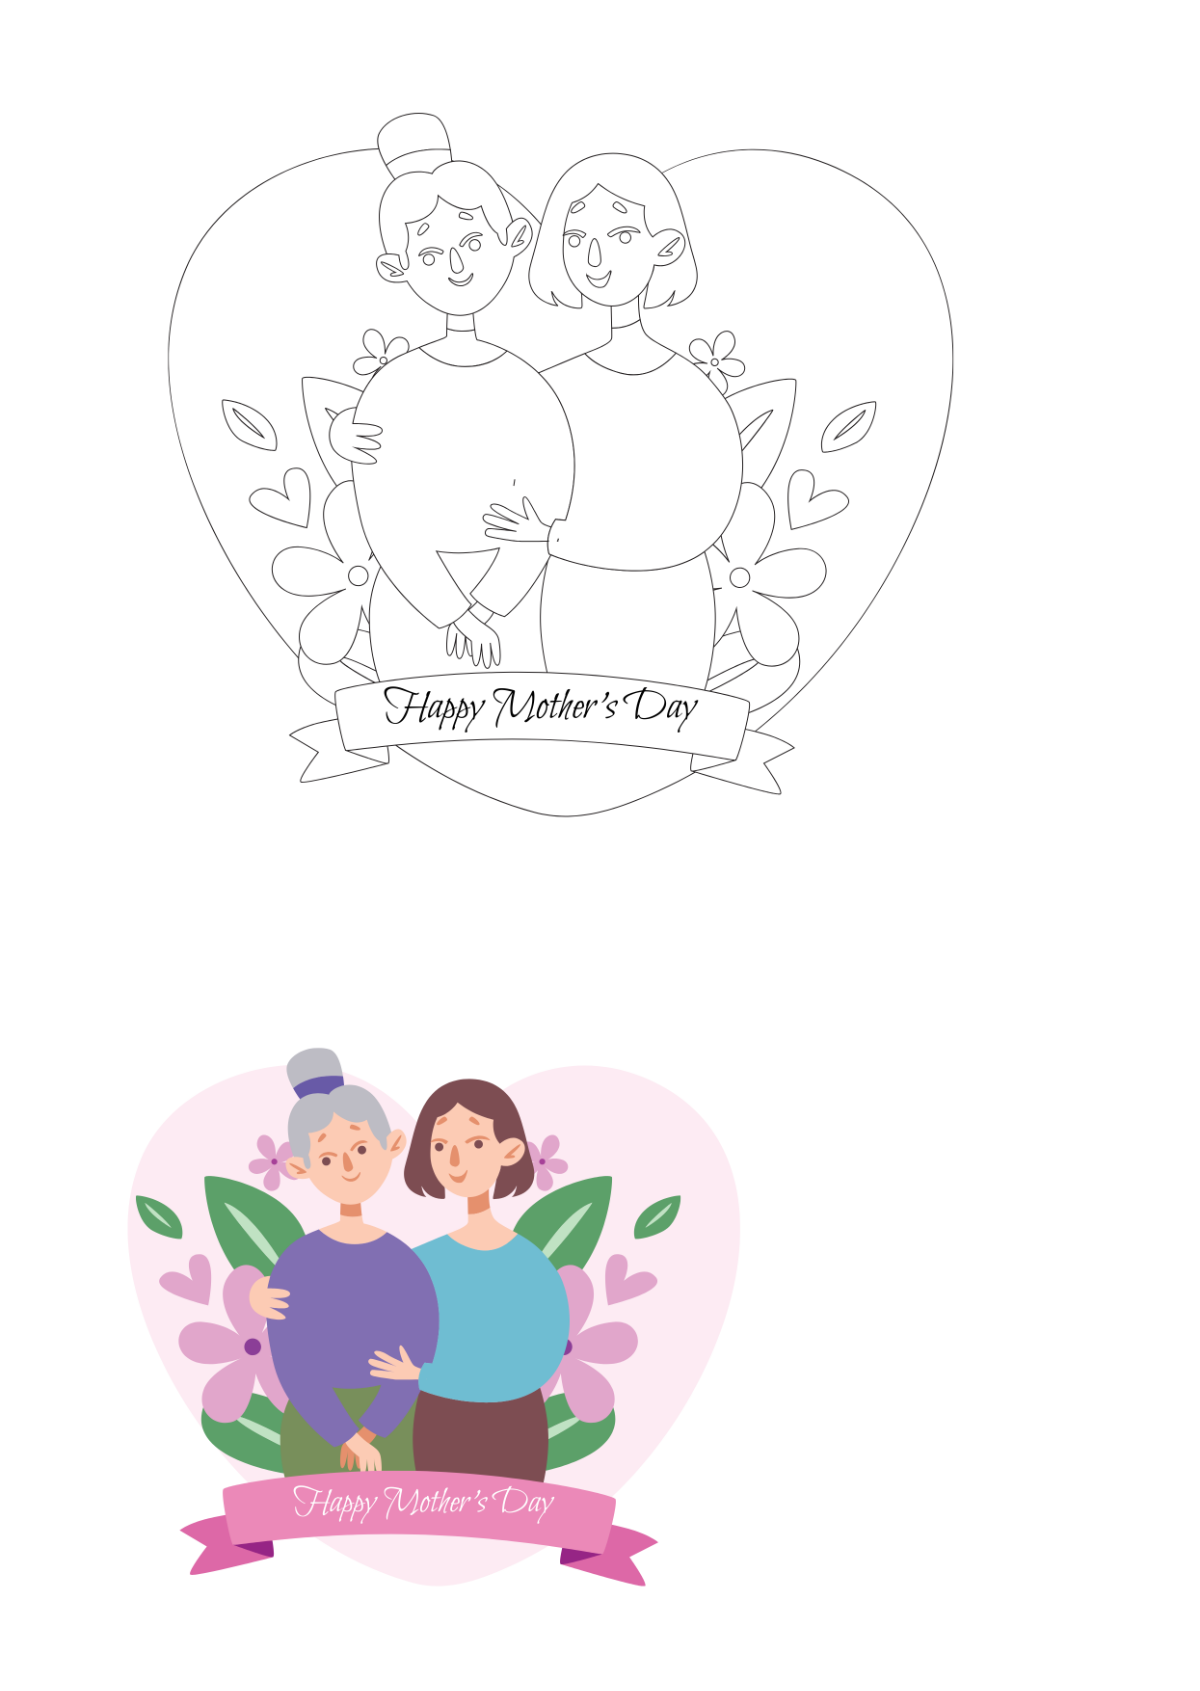 Free Mother's Day Coloring Pages for Adults Template